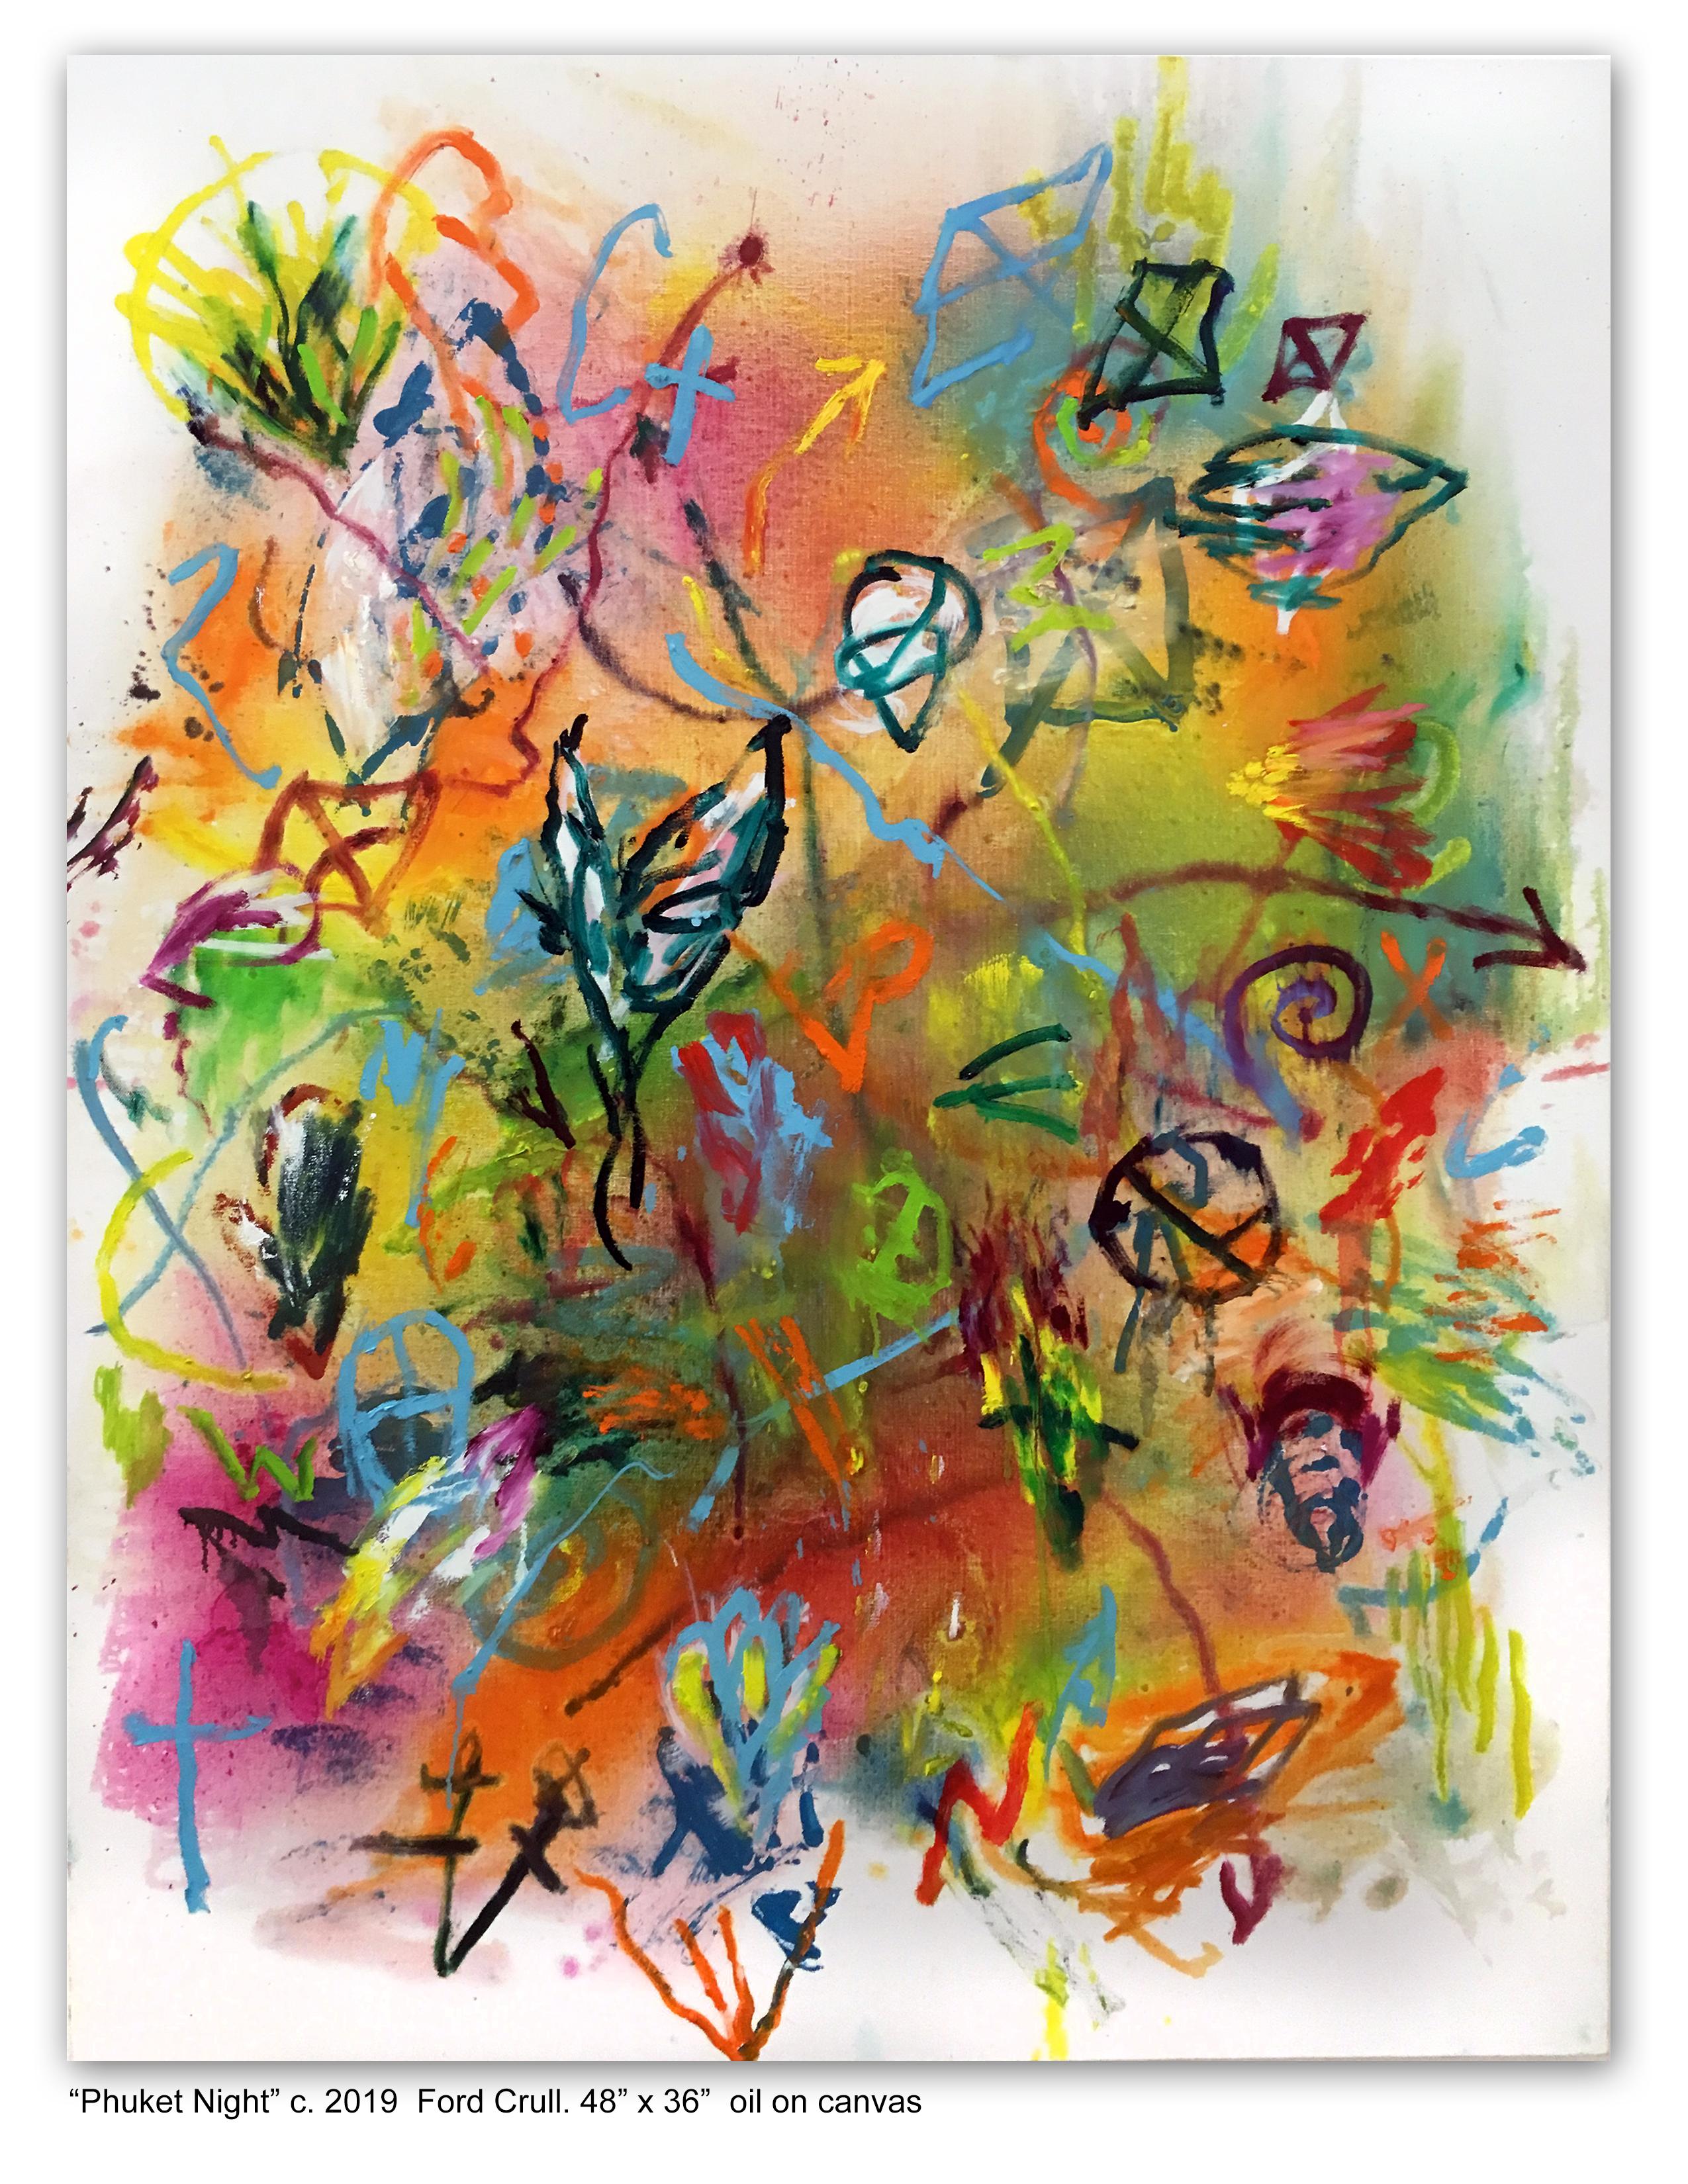 Ford Crull Abstract Painting - PHUKET NIGHT - green, orange, pink, yellow abstract painting with symbols